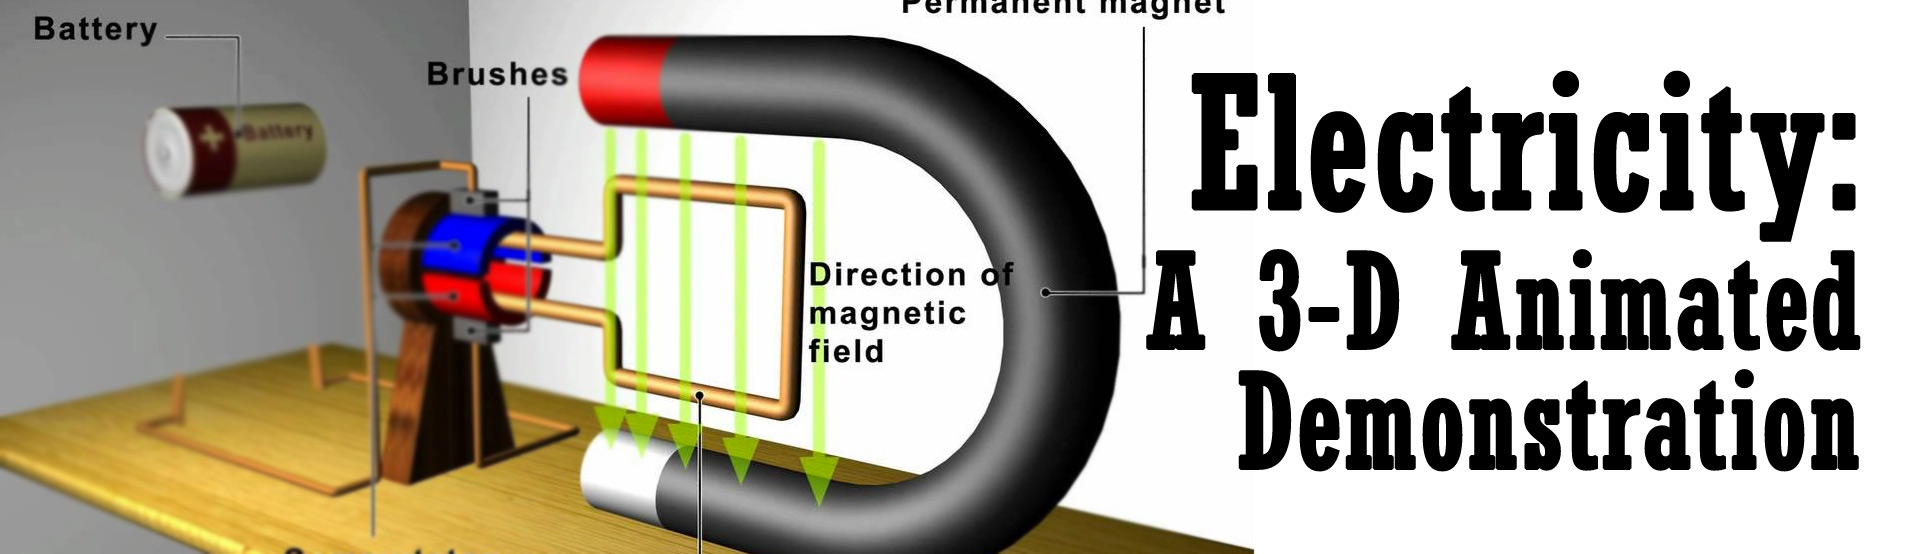 Electricity: A 3-D Animated Demonstration